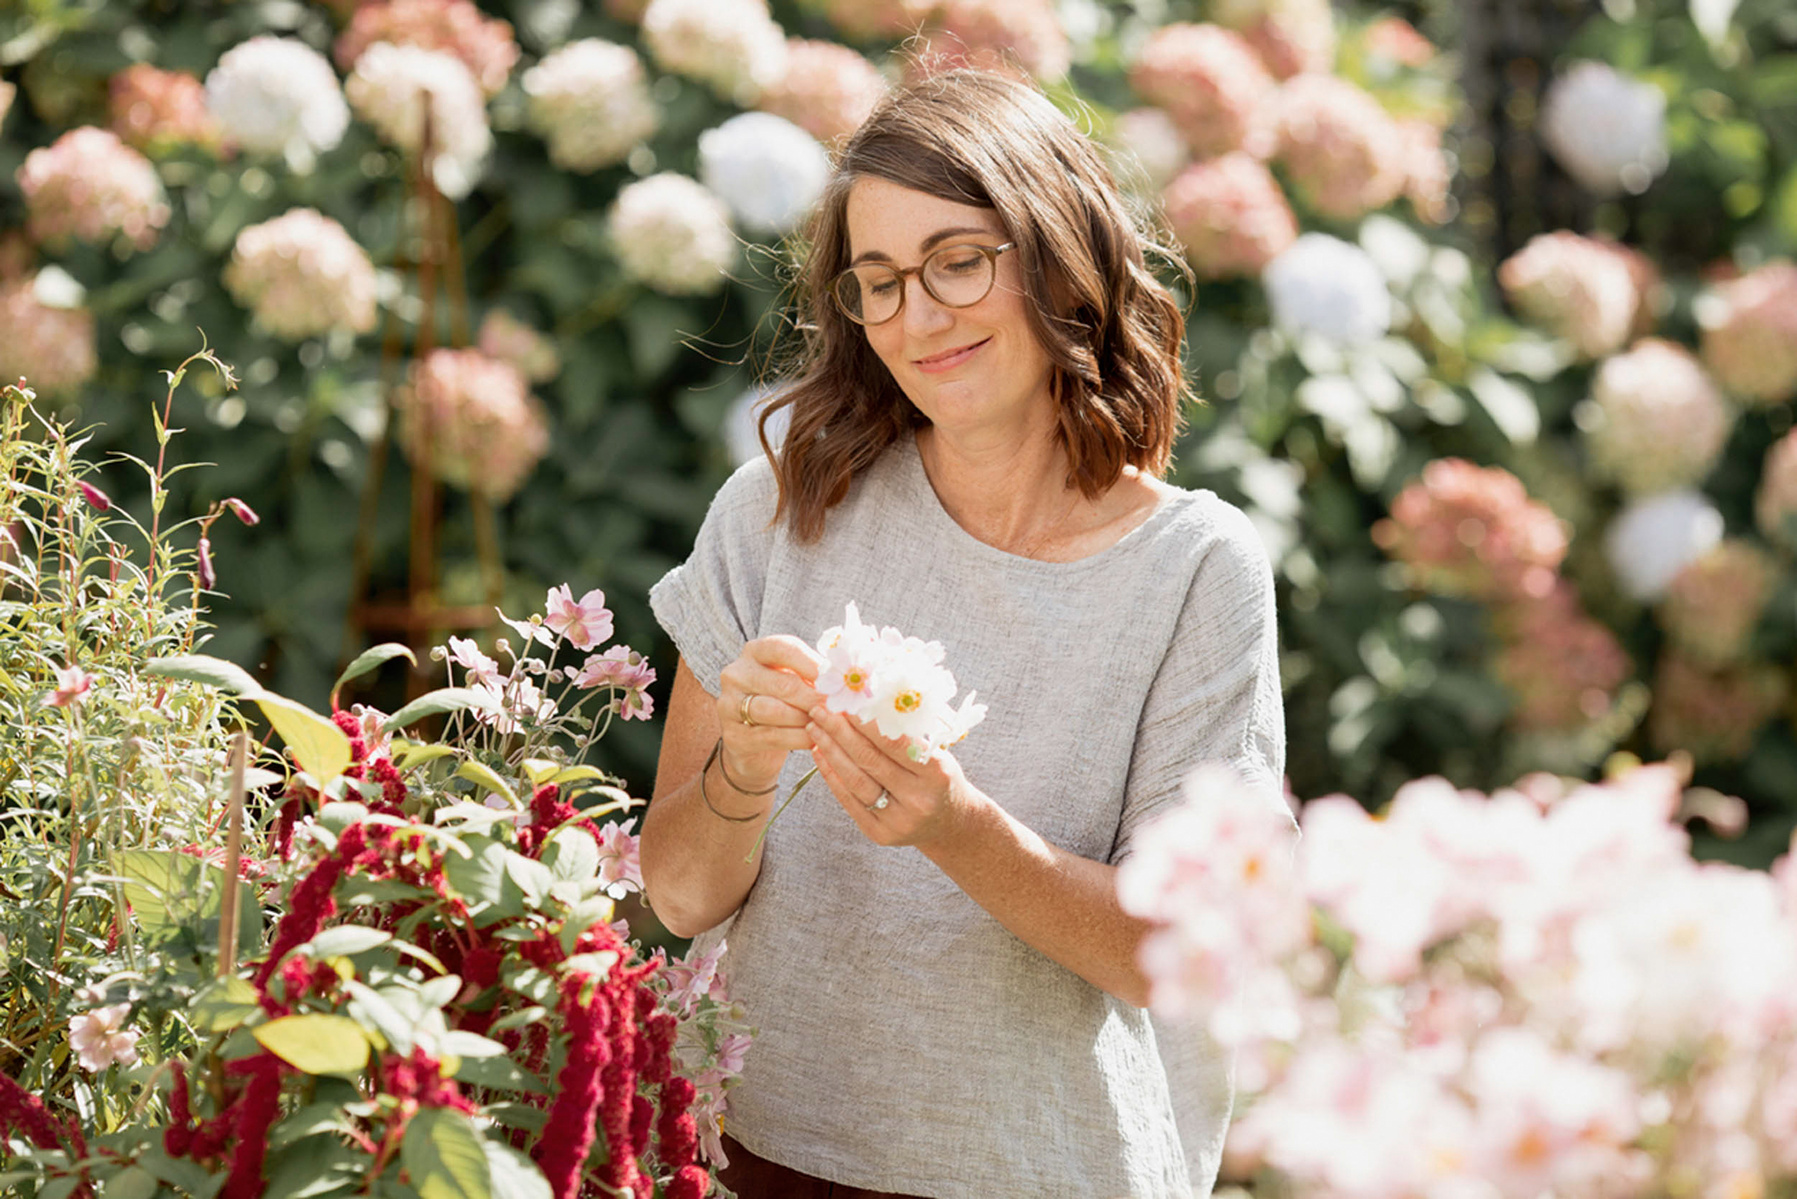 A healthy looking brunette woman smiles gently as she picks white flowers